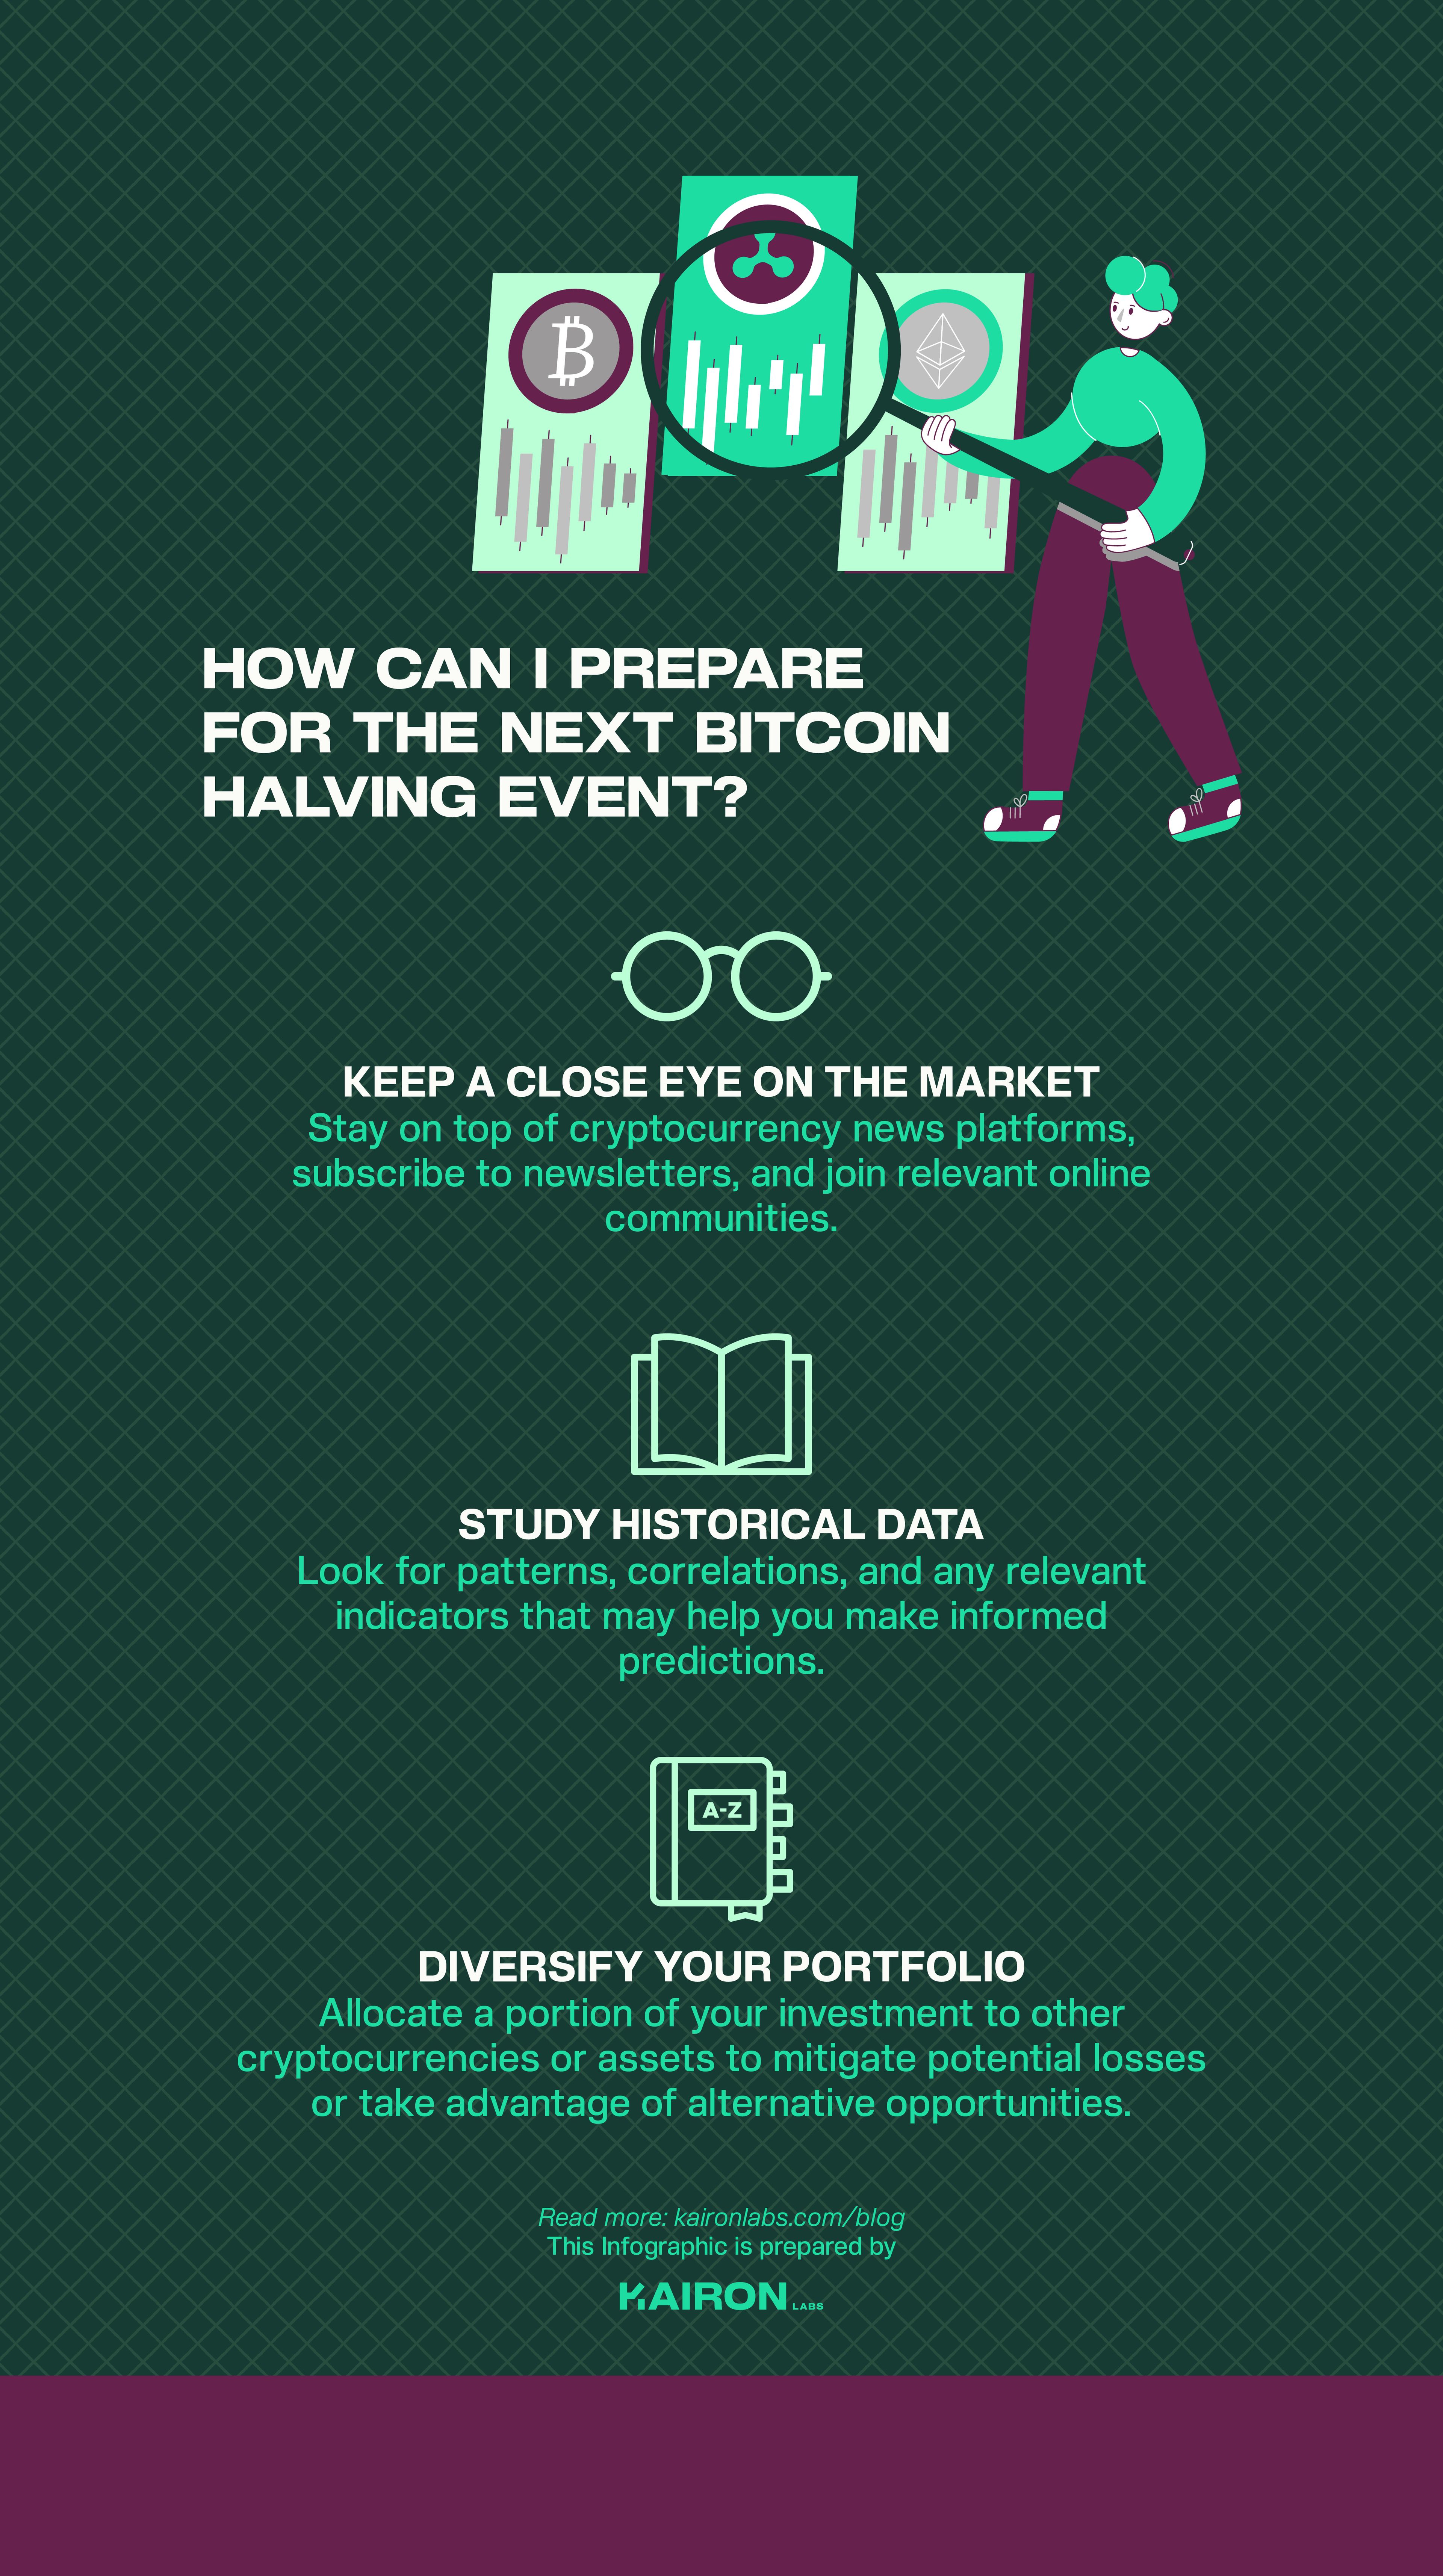 How to Prepare for the next Bitcoin Halving: An Infographic